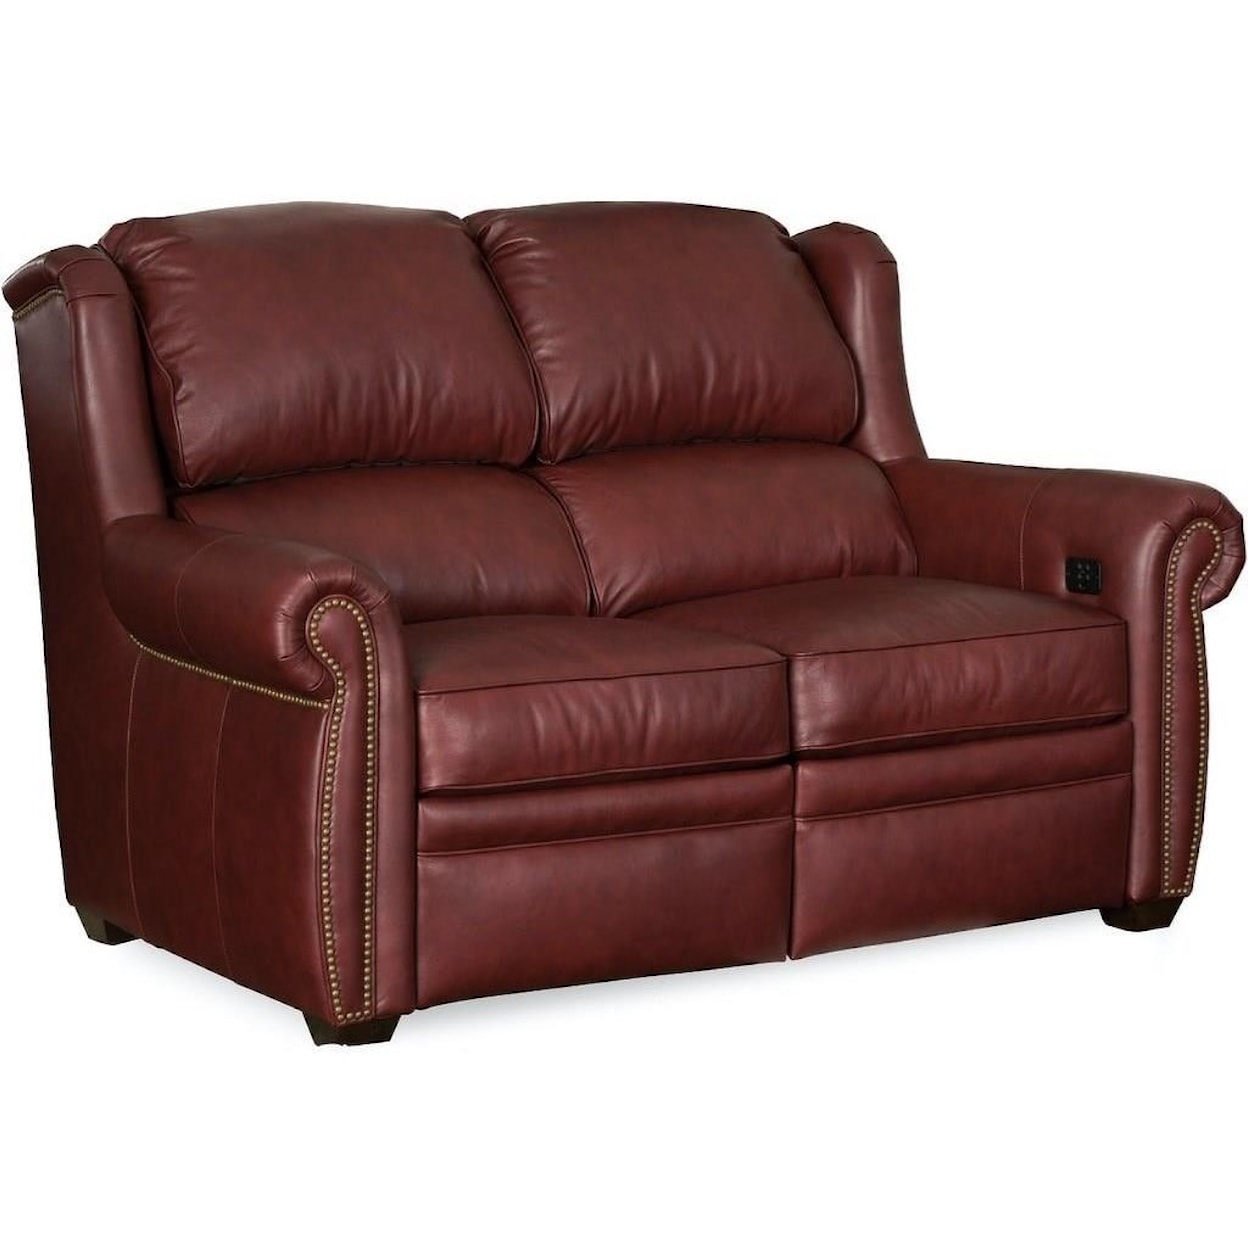 Bradington Young Discovery Motion Loveseat with Power Headrests